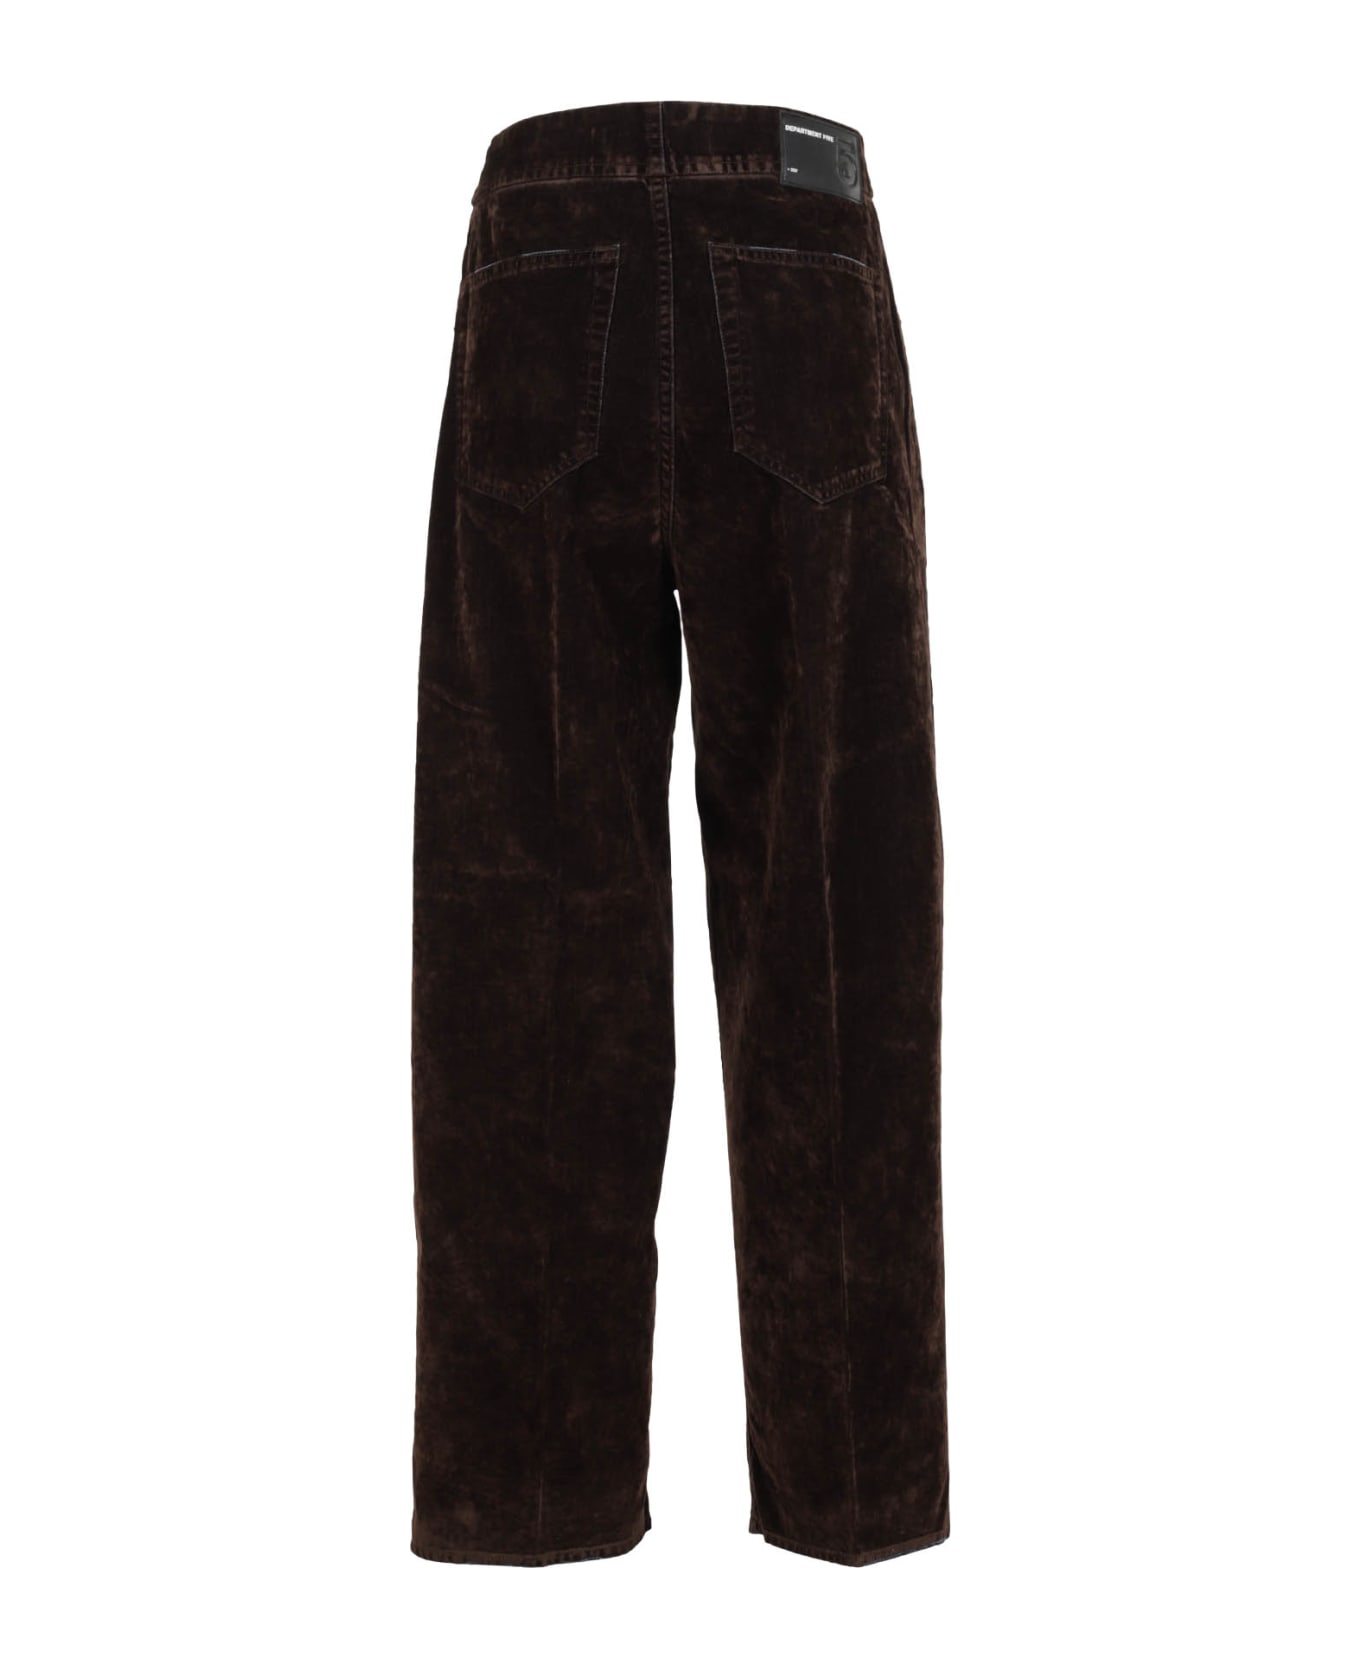 Department Five Trousers Department Five - BROWN ボトムス